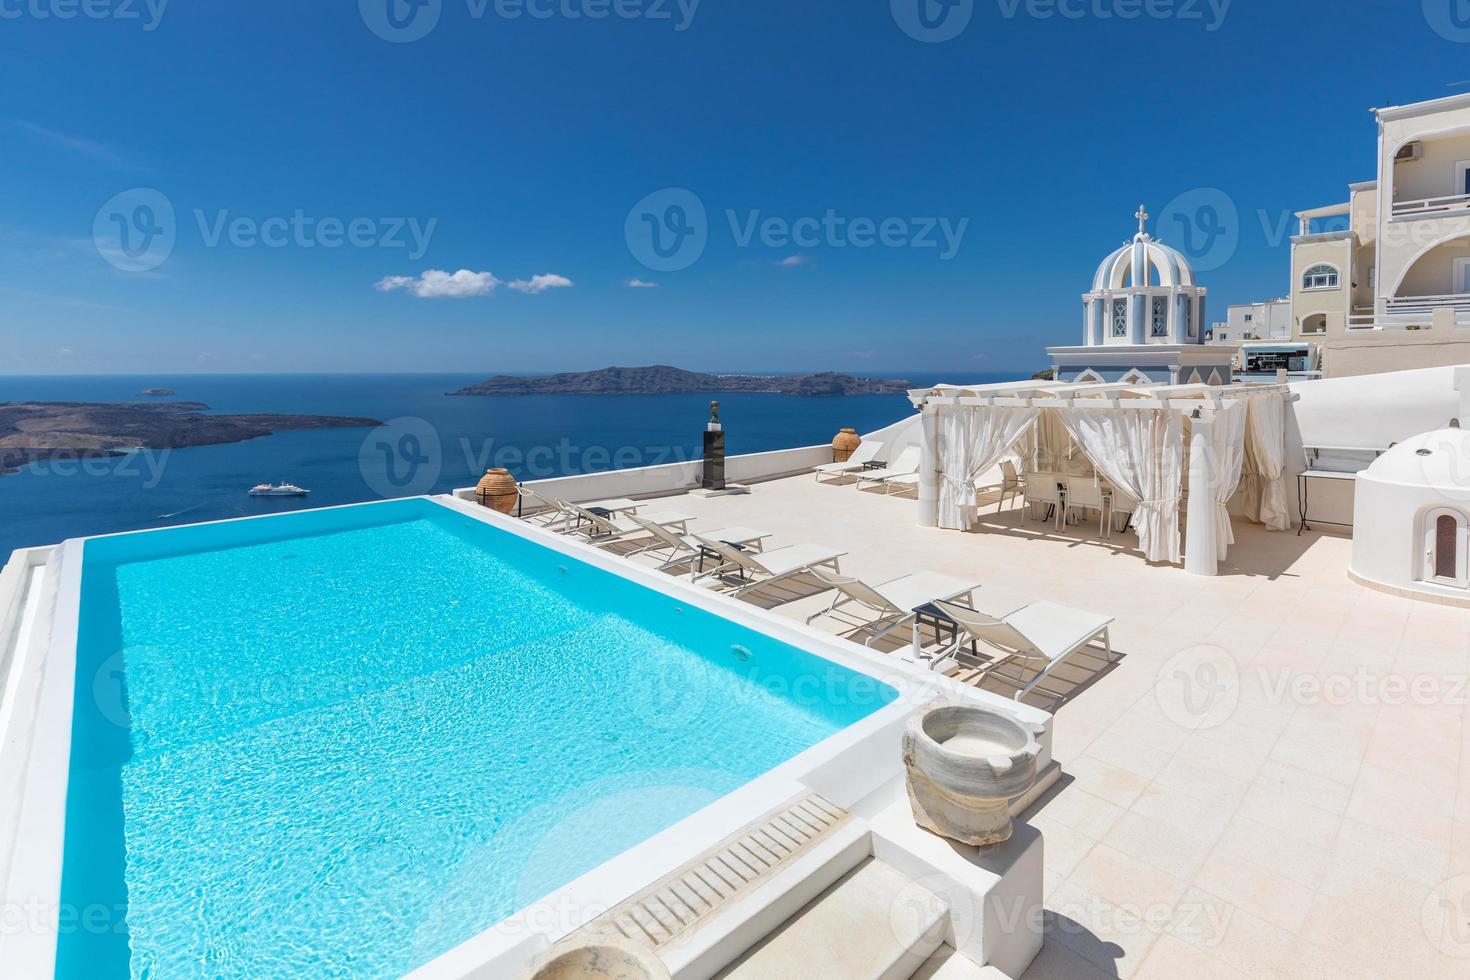 White architecture on Santorini island, Greece. Swimming pool in luxury hotel. Beautiful view, sky over blue sea. Summer vacation and holiday as travel destination concept, amazing tourism background photo